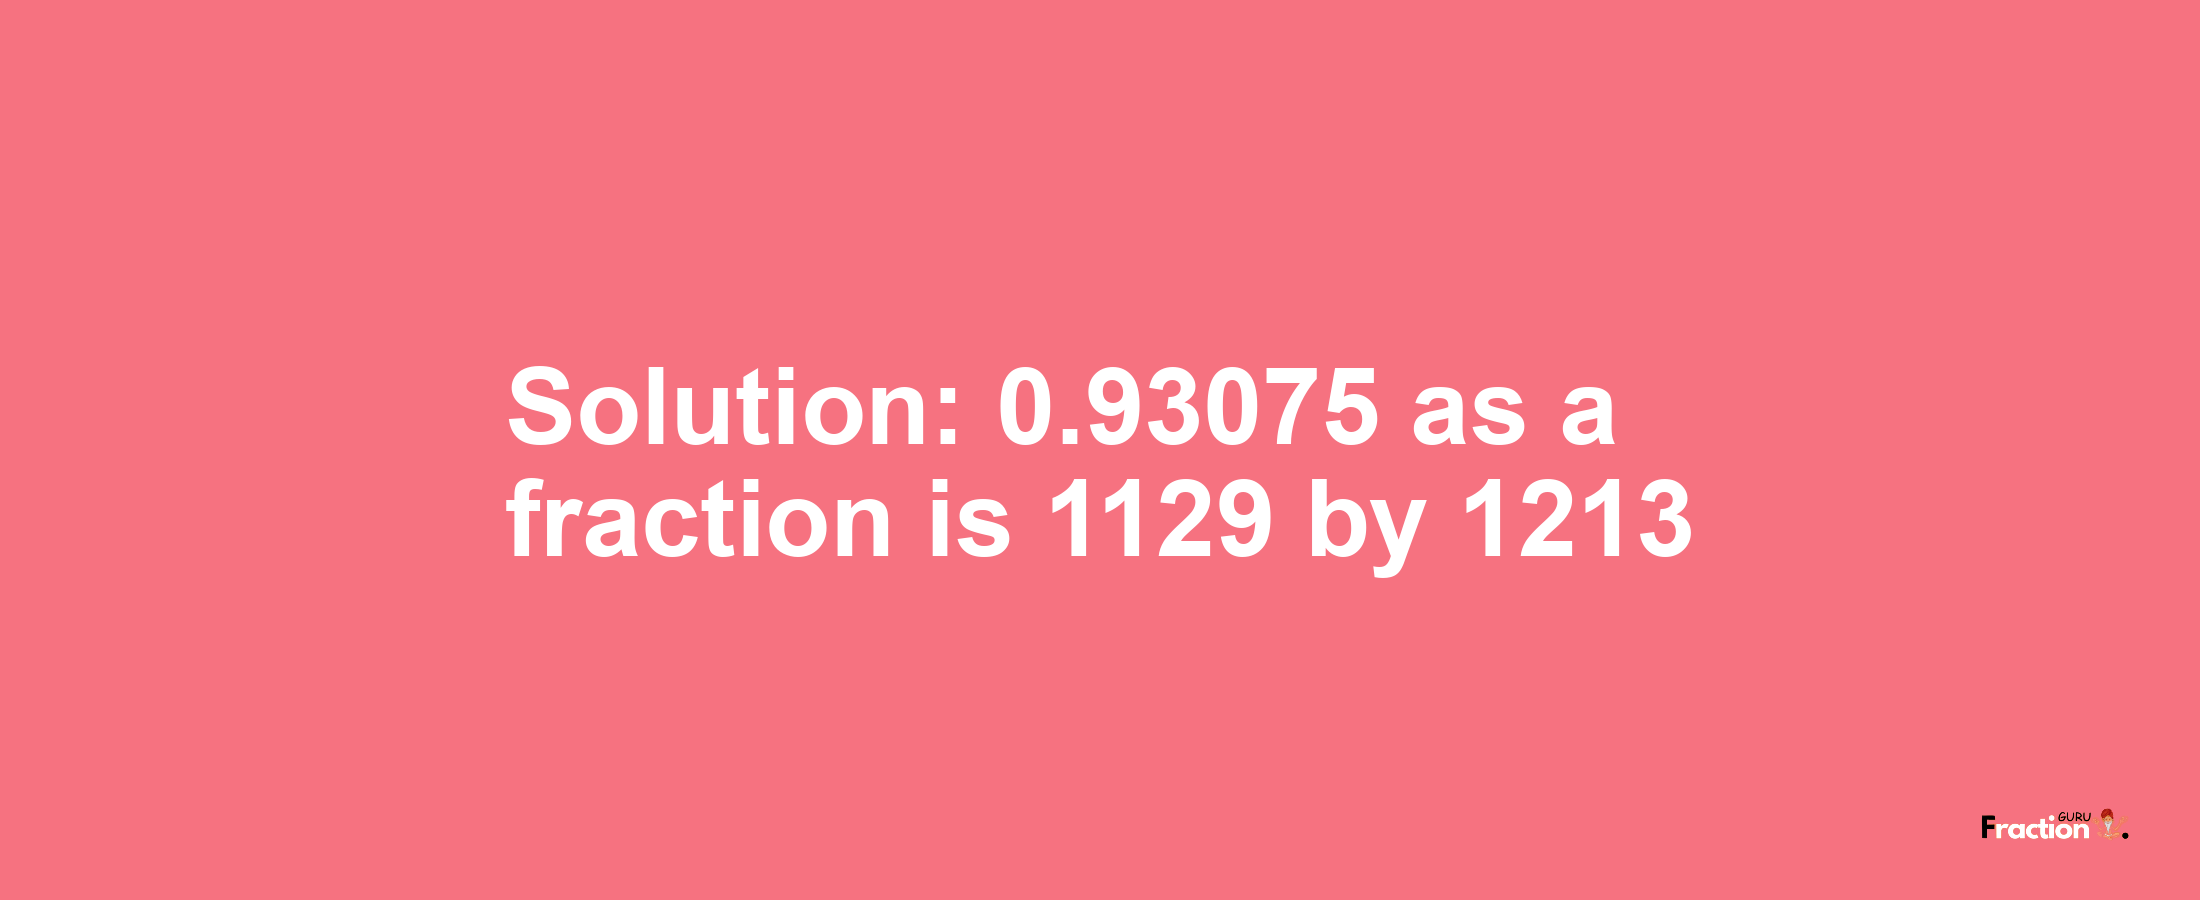 Solution:0.93075 as a fraction is 1129/1213